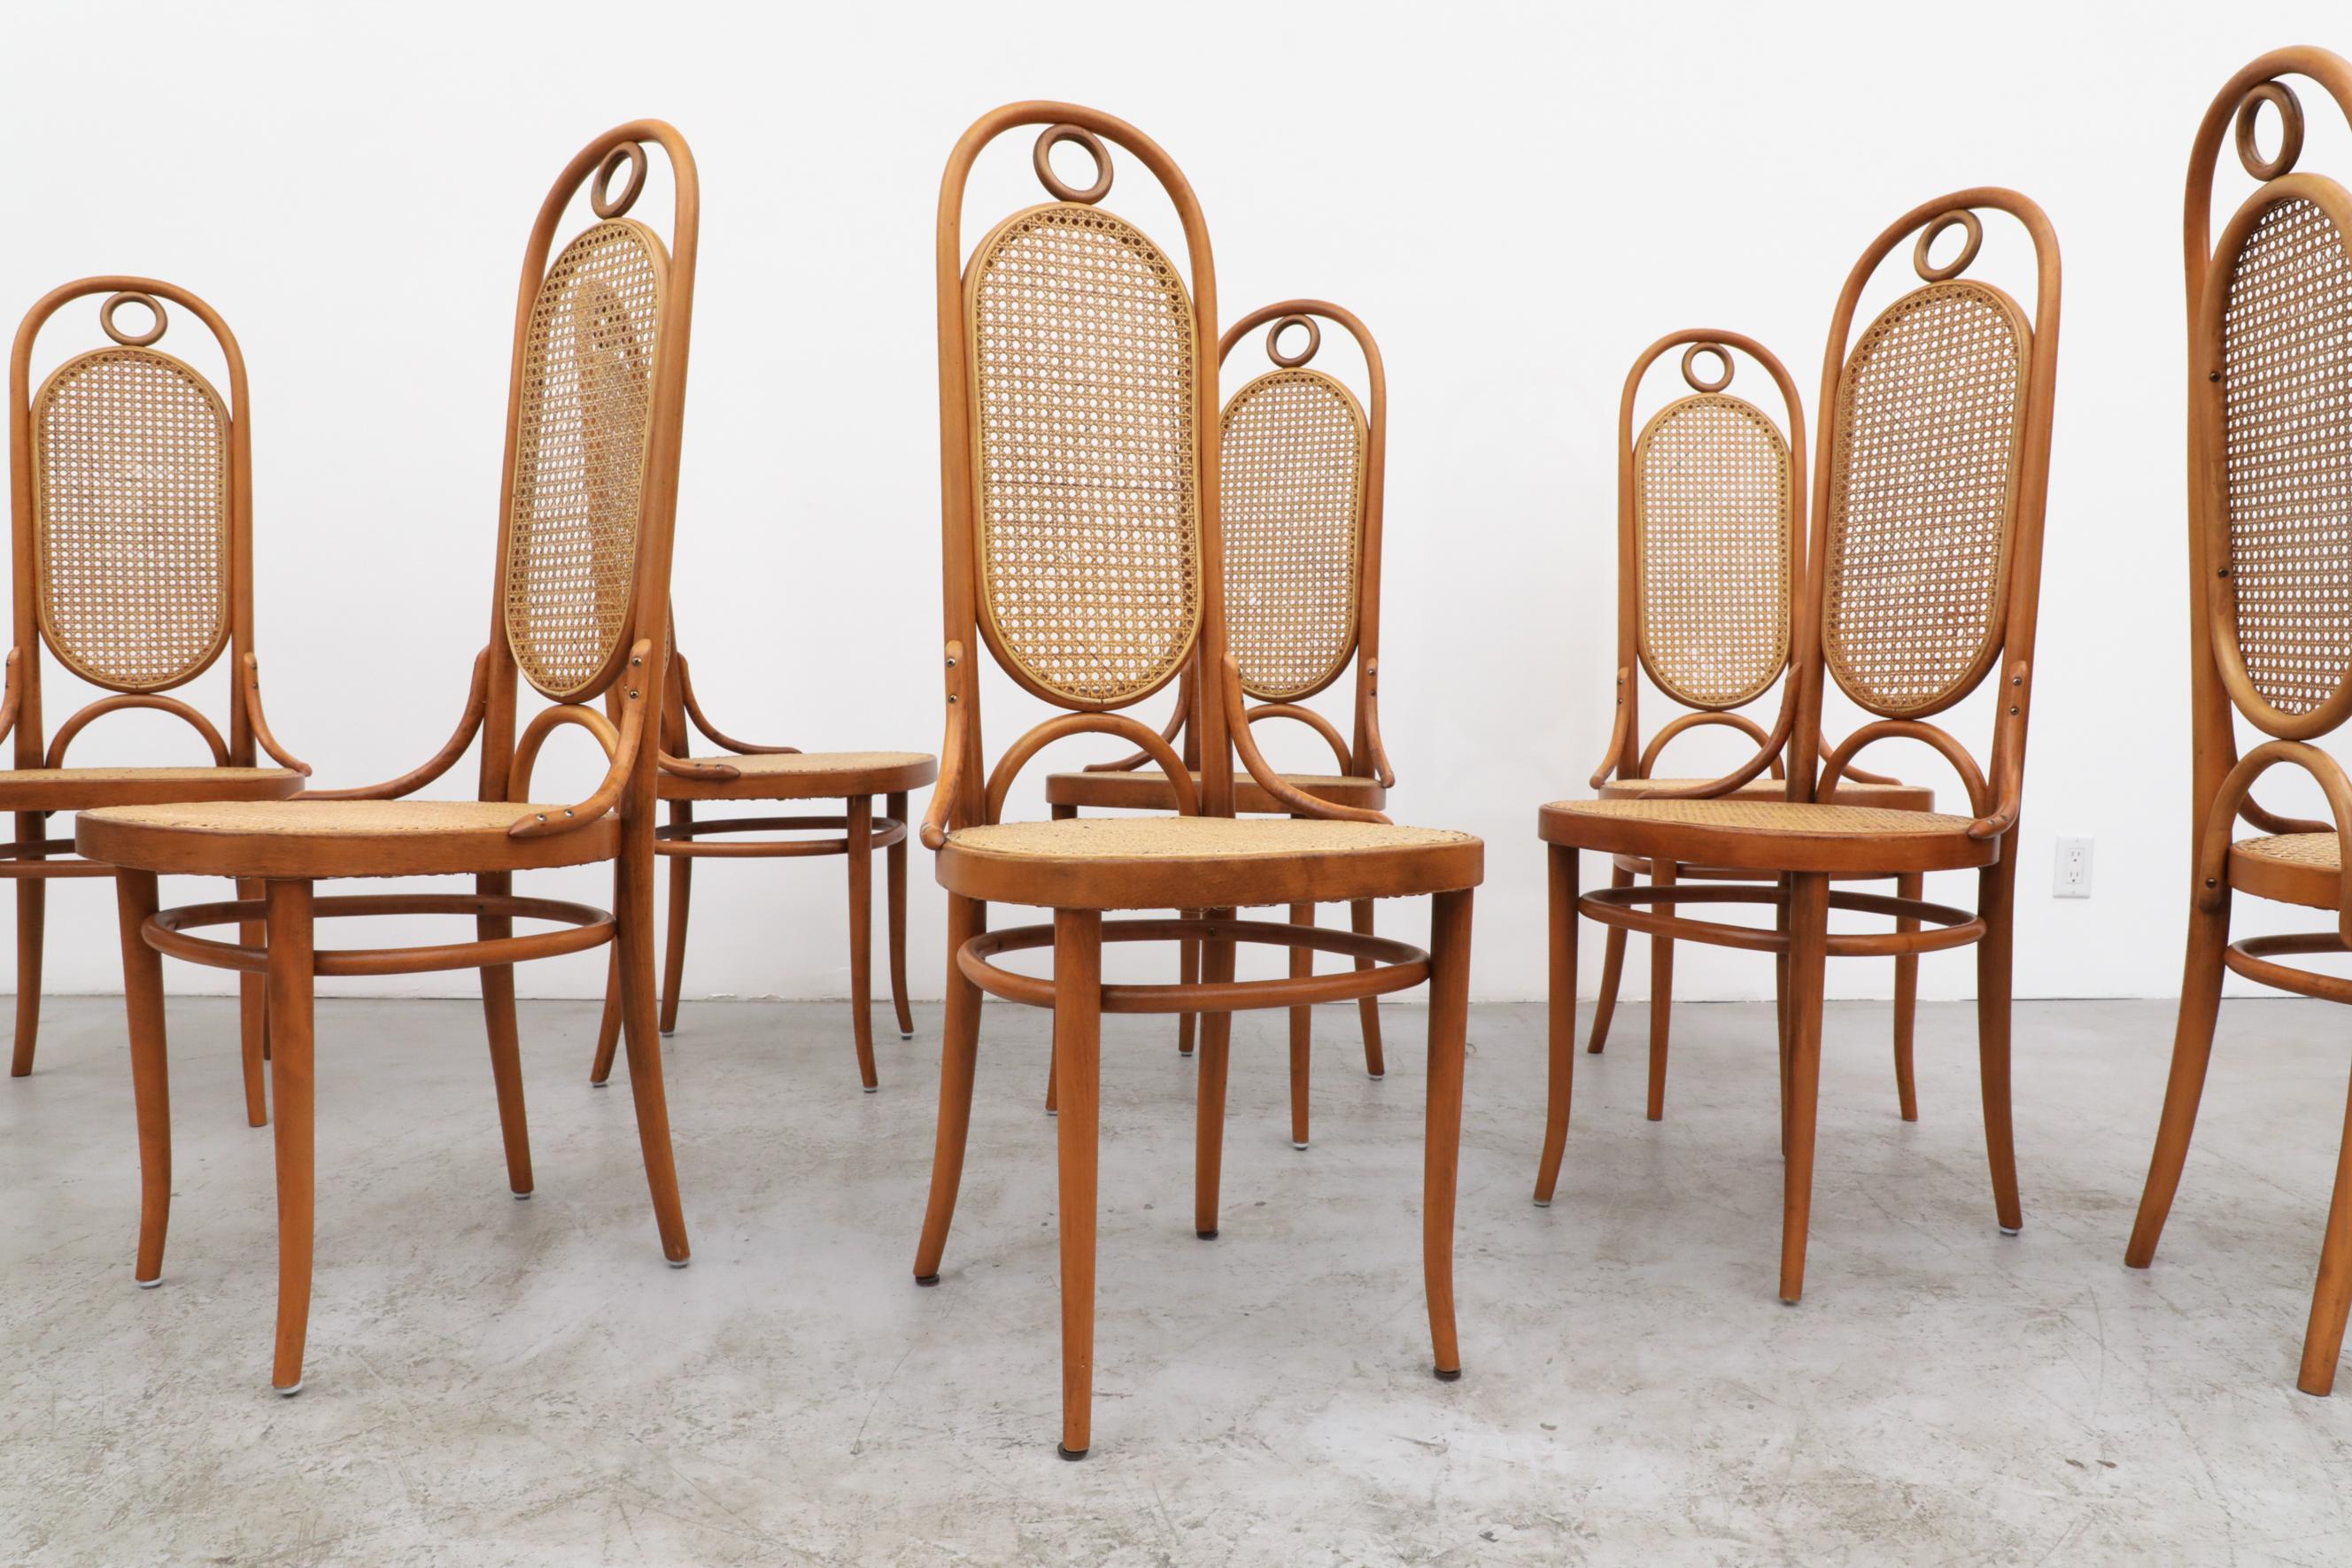 Set of 8 Thonet N.17 High Back Bentwood Chairs 1